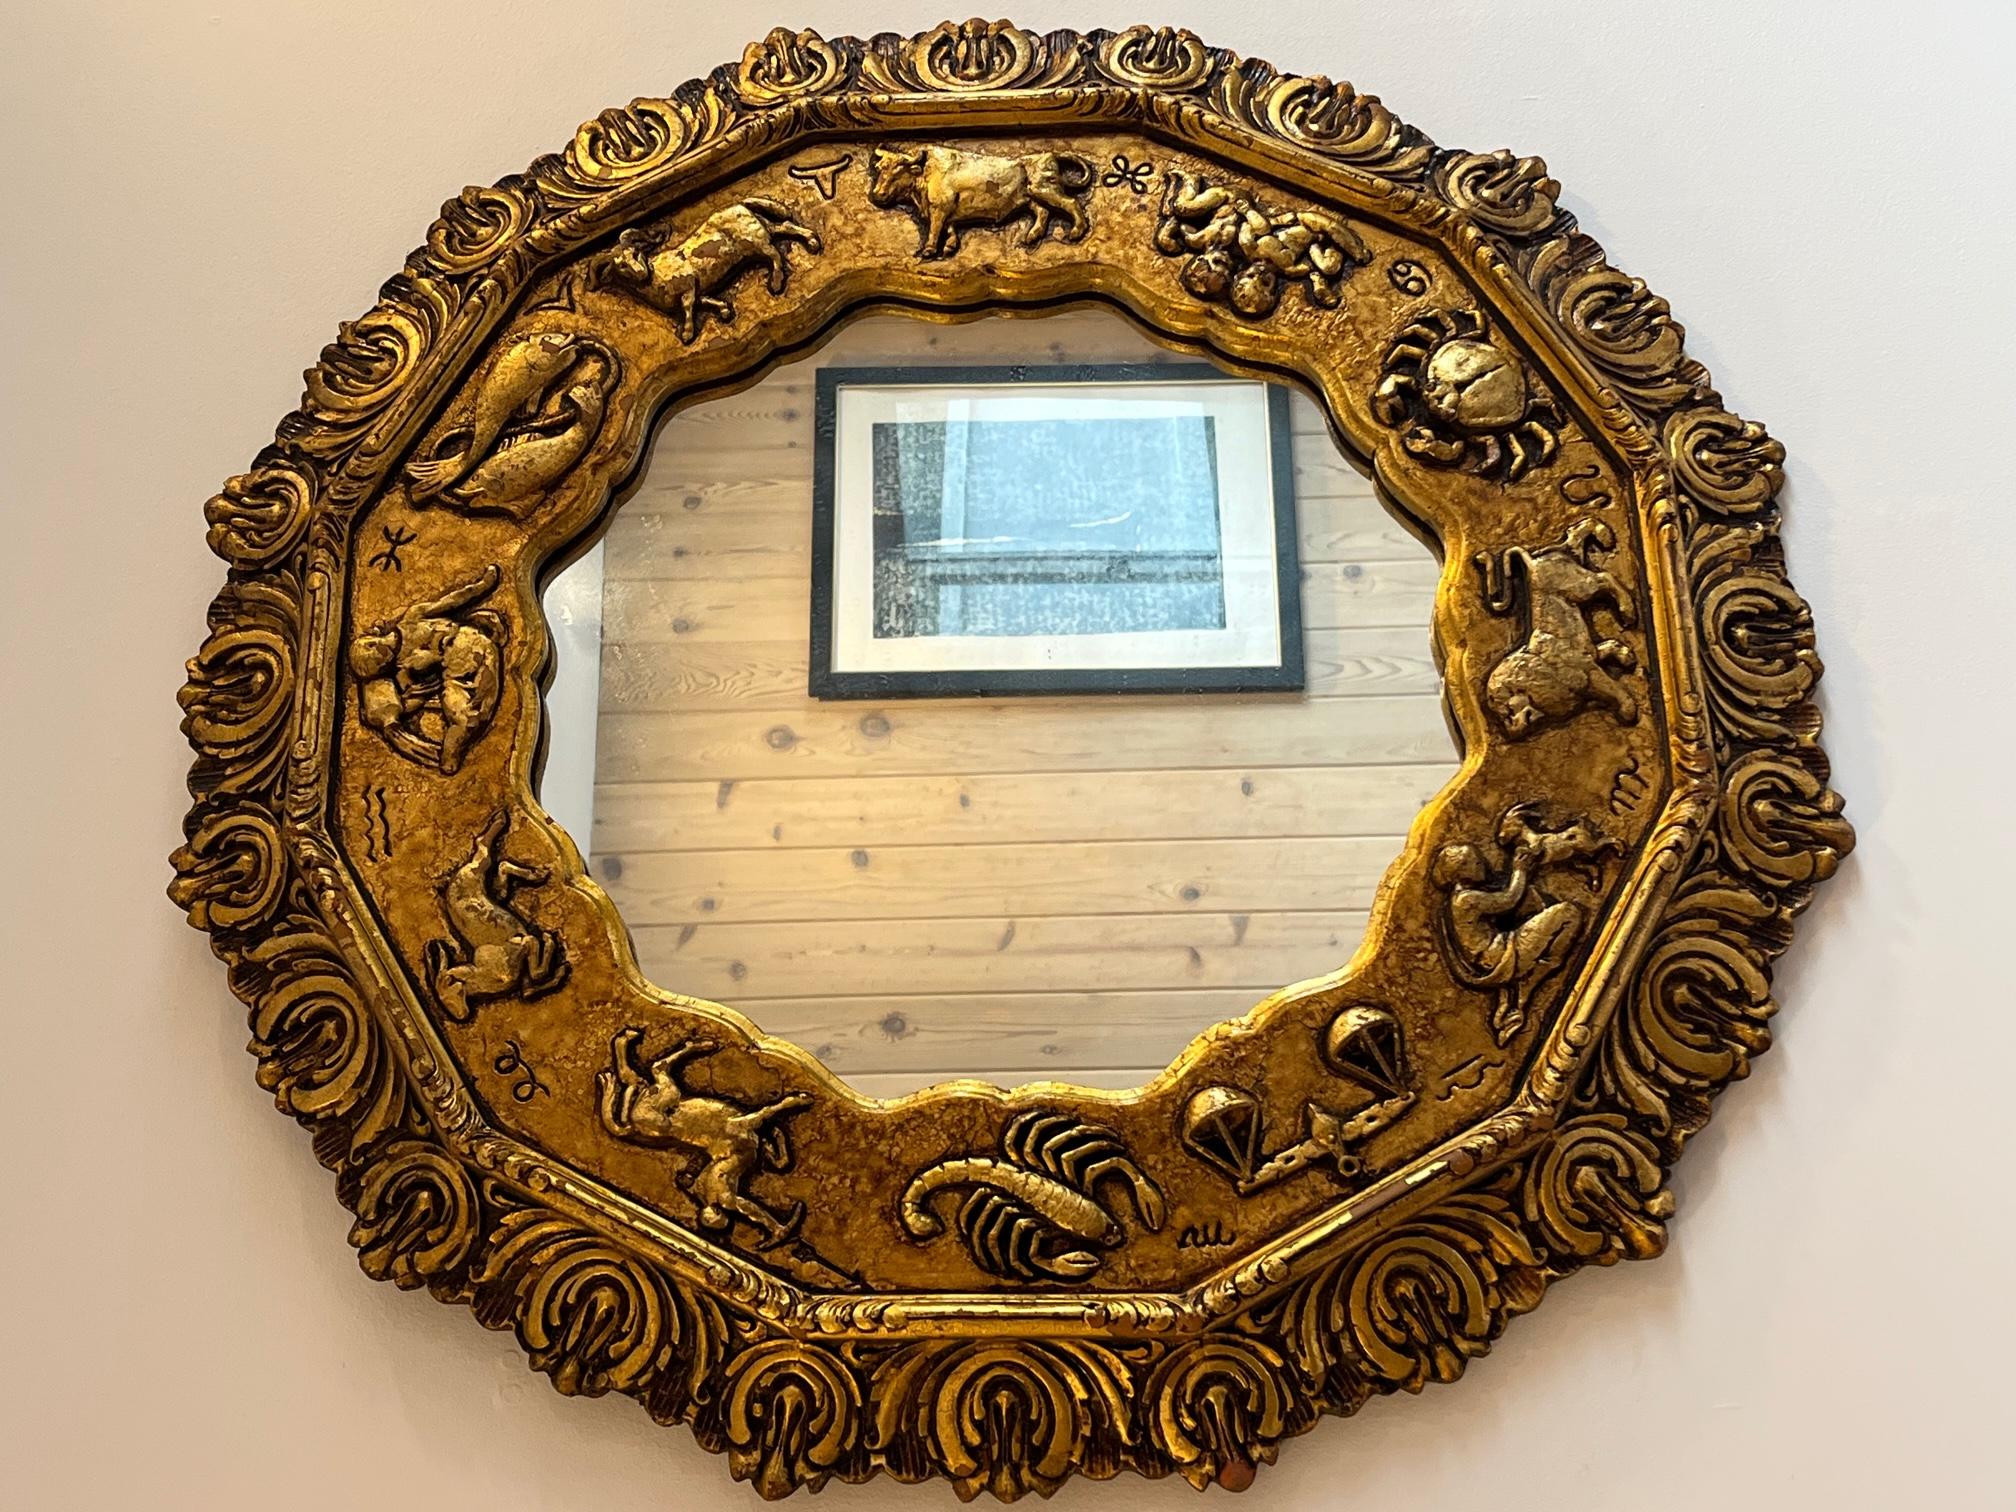 A French circa 1920s gilt mirror with zodiac signs.

Measurements:
Diameter: 33